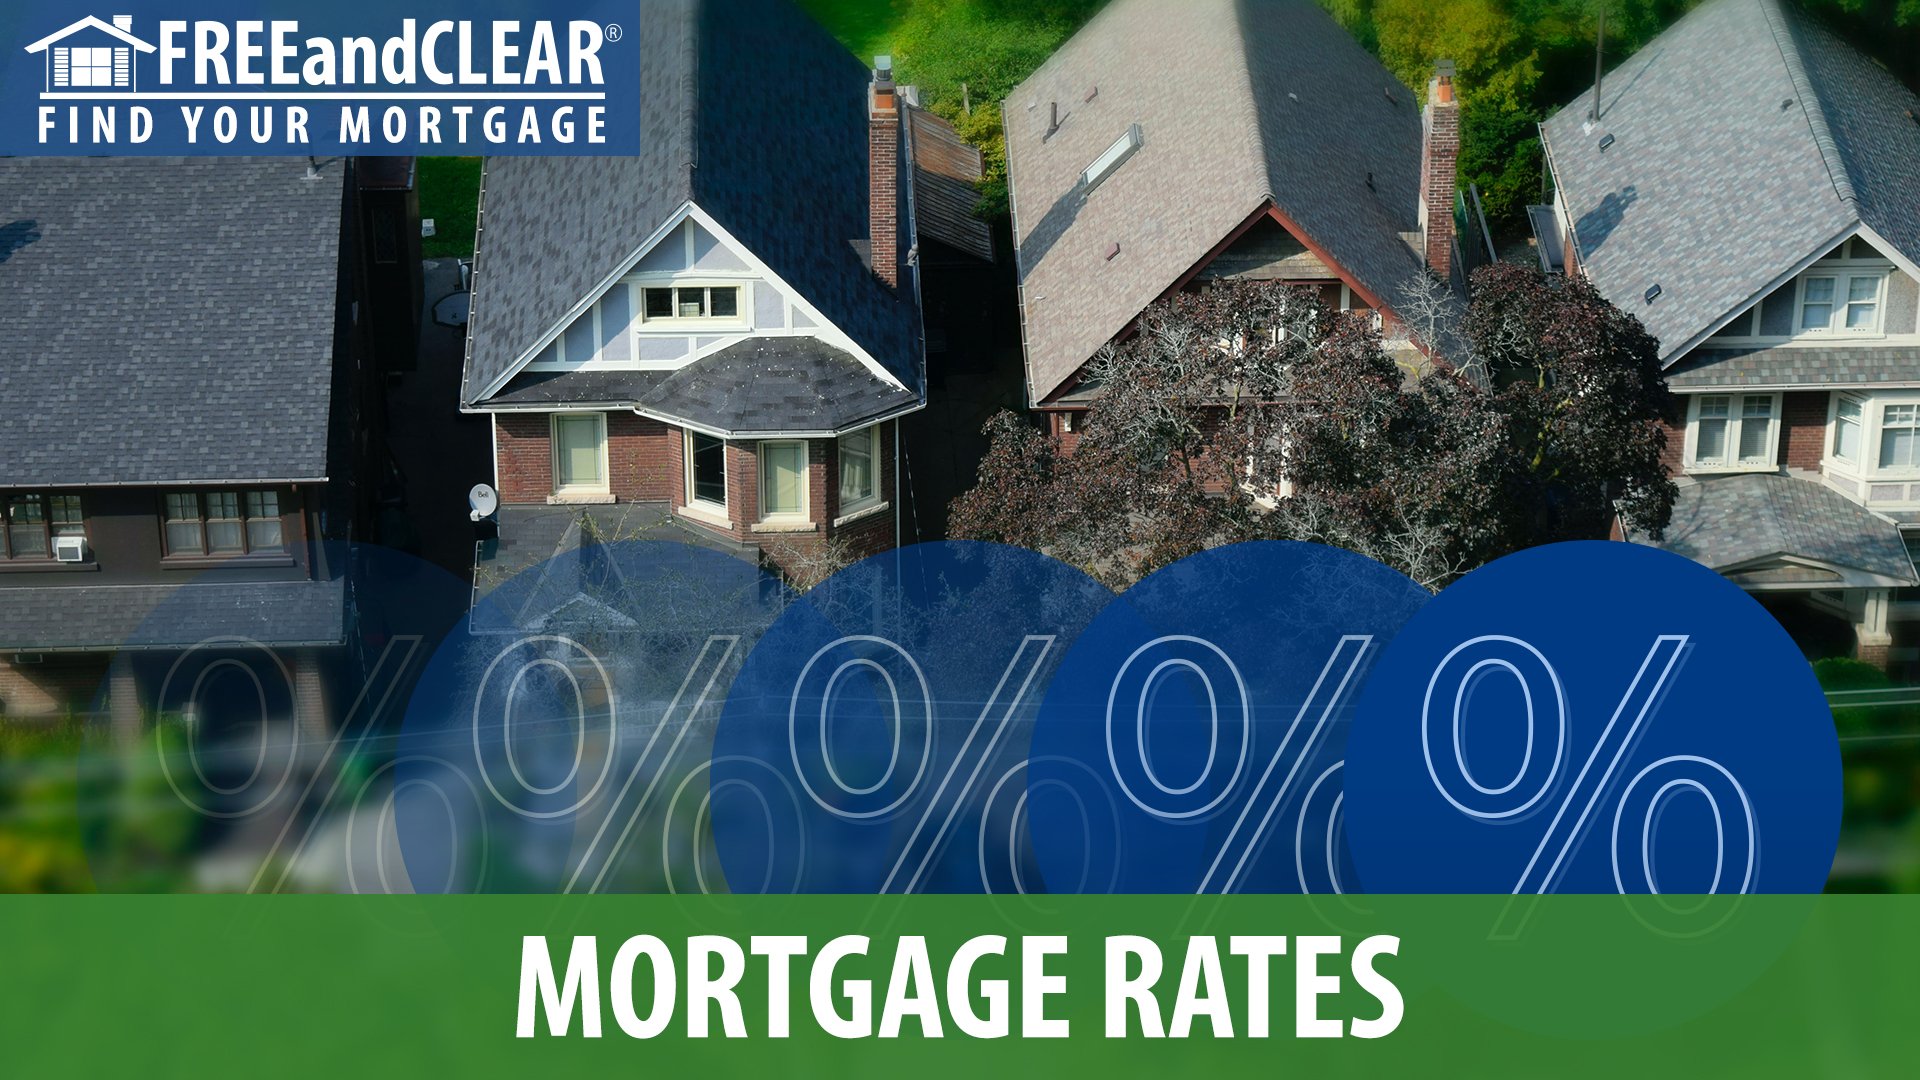 Compare Current Austin, TX Mortgage Rates | FREEandCLEAR